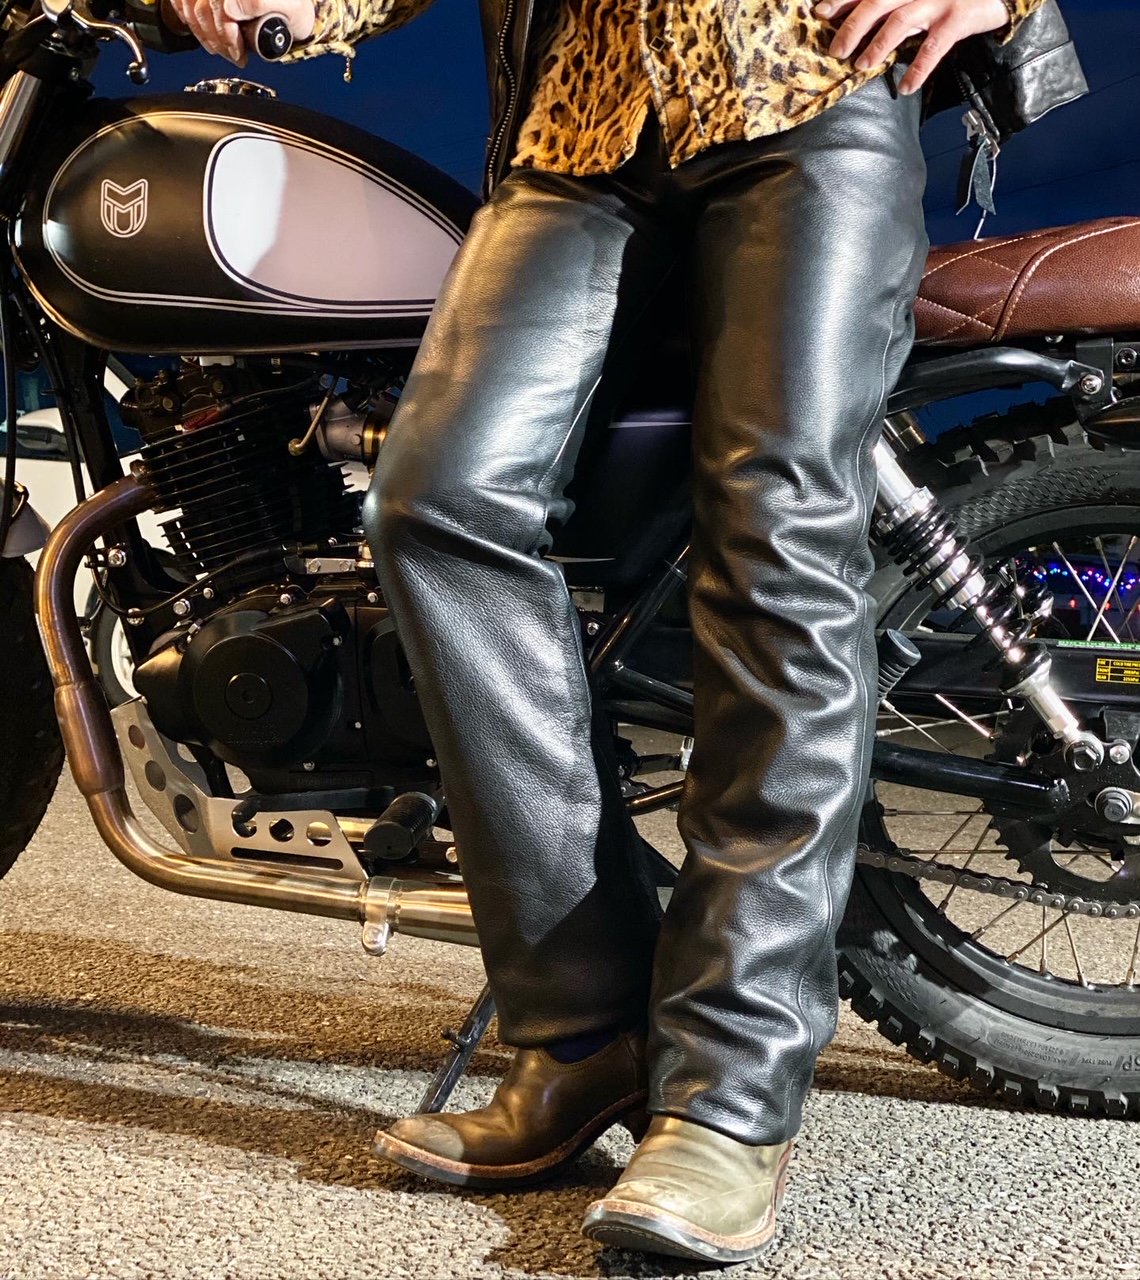 Y'2 LEATHER/ワイツーレザー】レザーパンツ/SPｰ02：STEER OIL PANTS